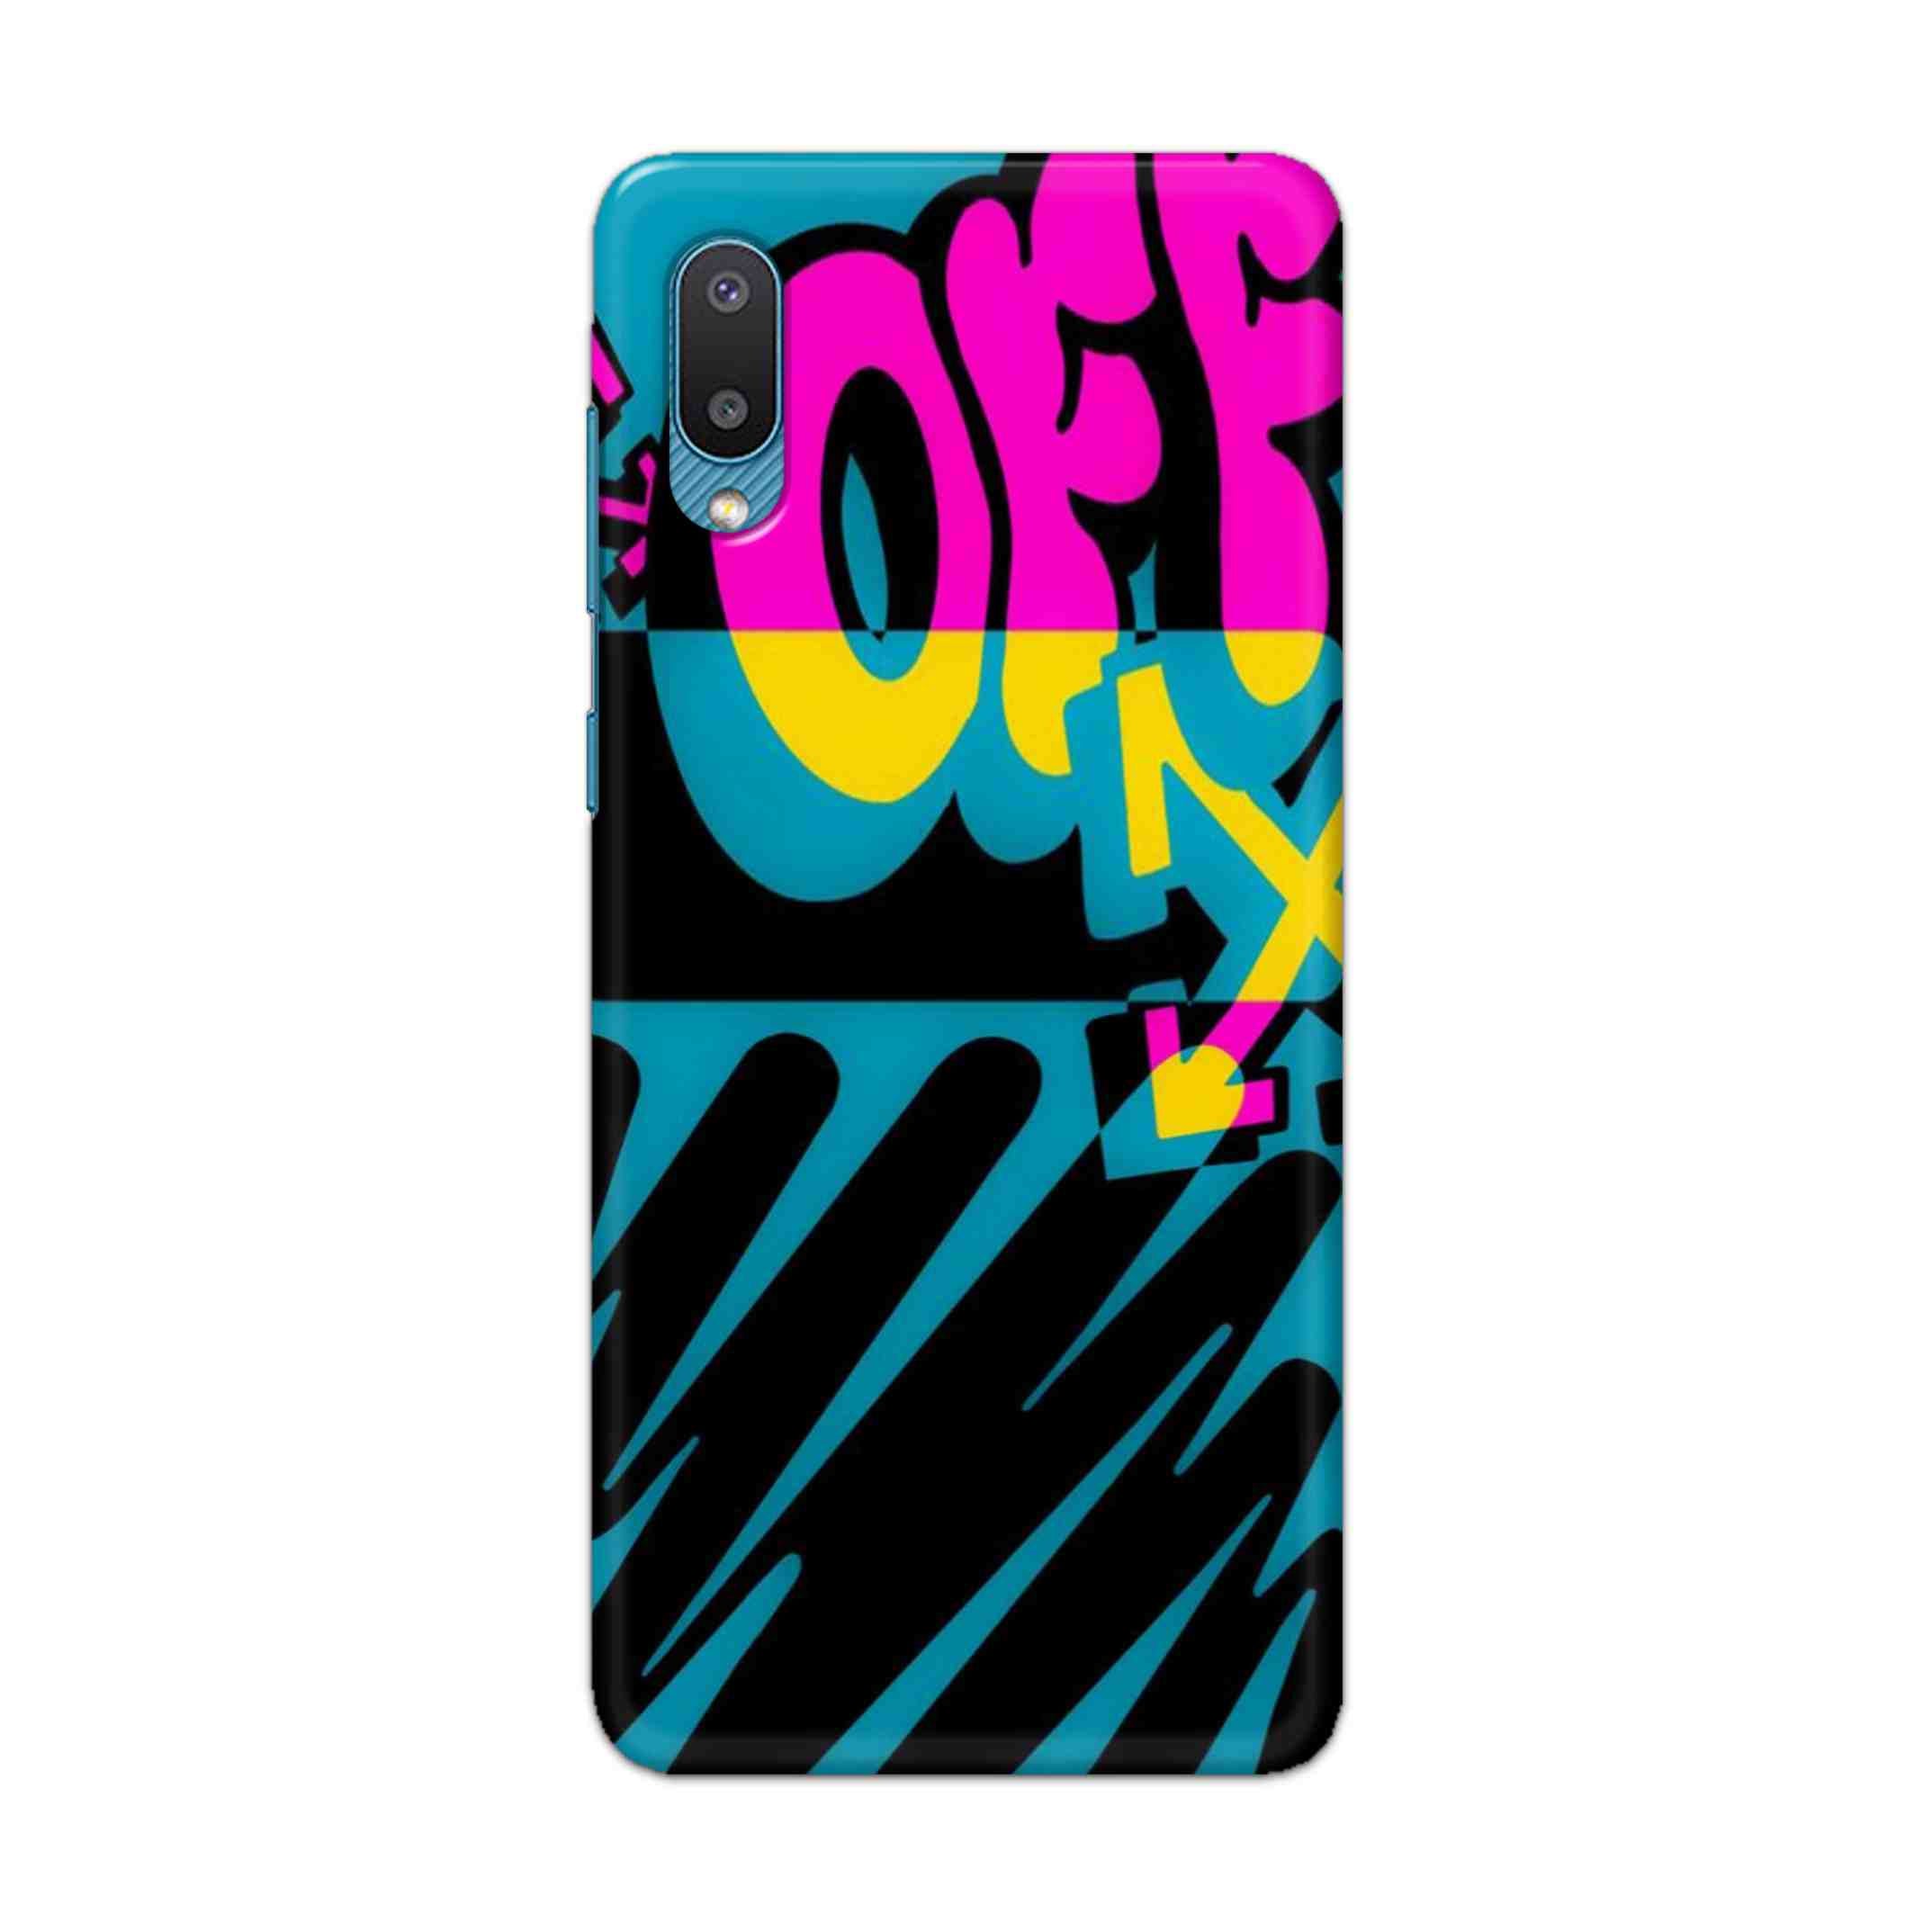 Buy Off Hard Back Mobile Phone Case Cover For Samsung Galaxy M02 Online